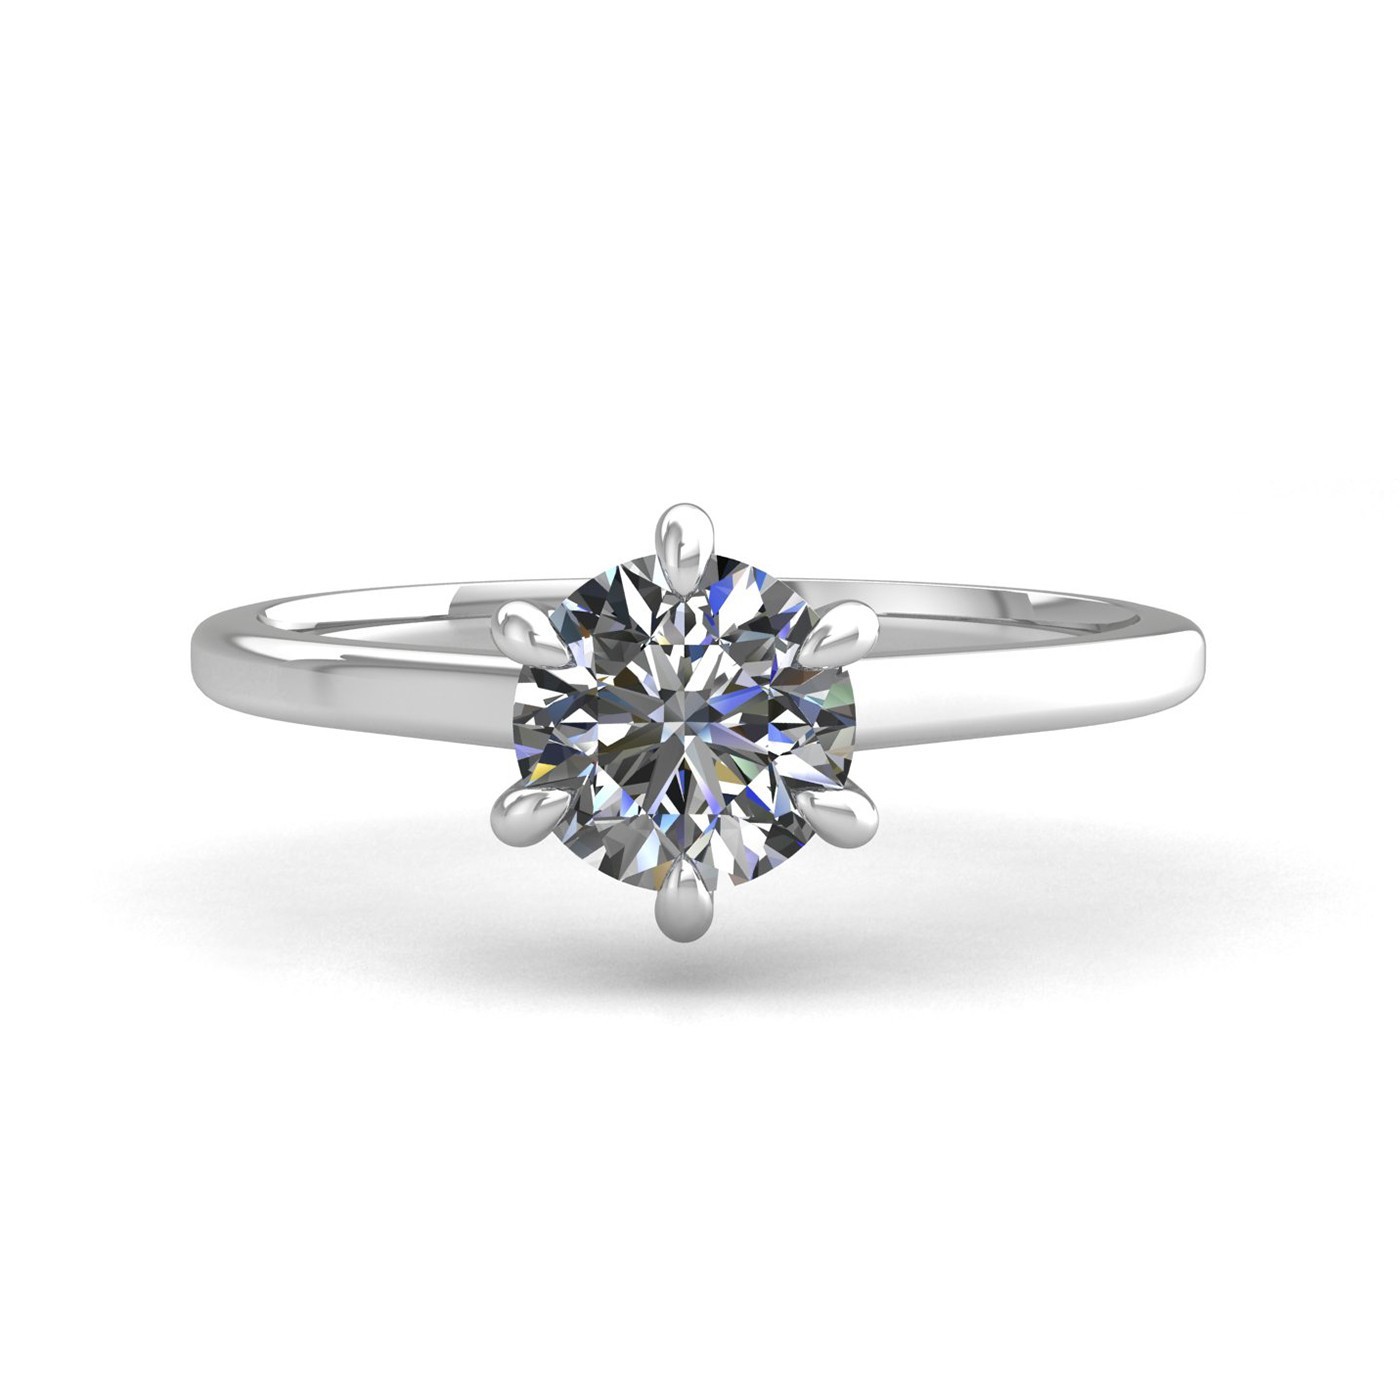 18k white gold 0,50 ct 6 prongs solitaire round cut diamond engagement ring with whisper thin band Photos & images